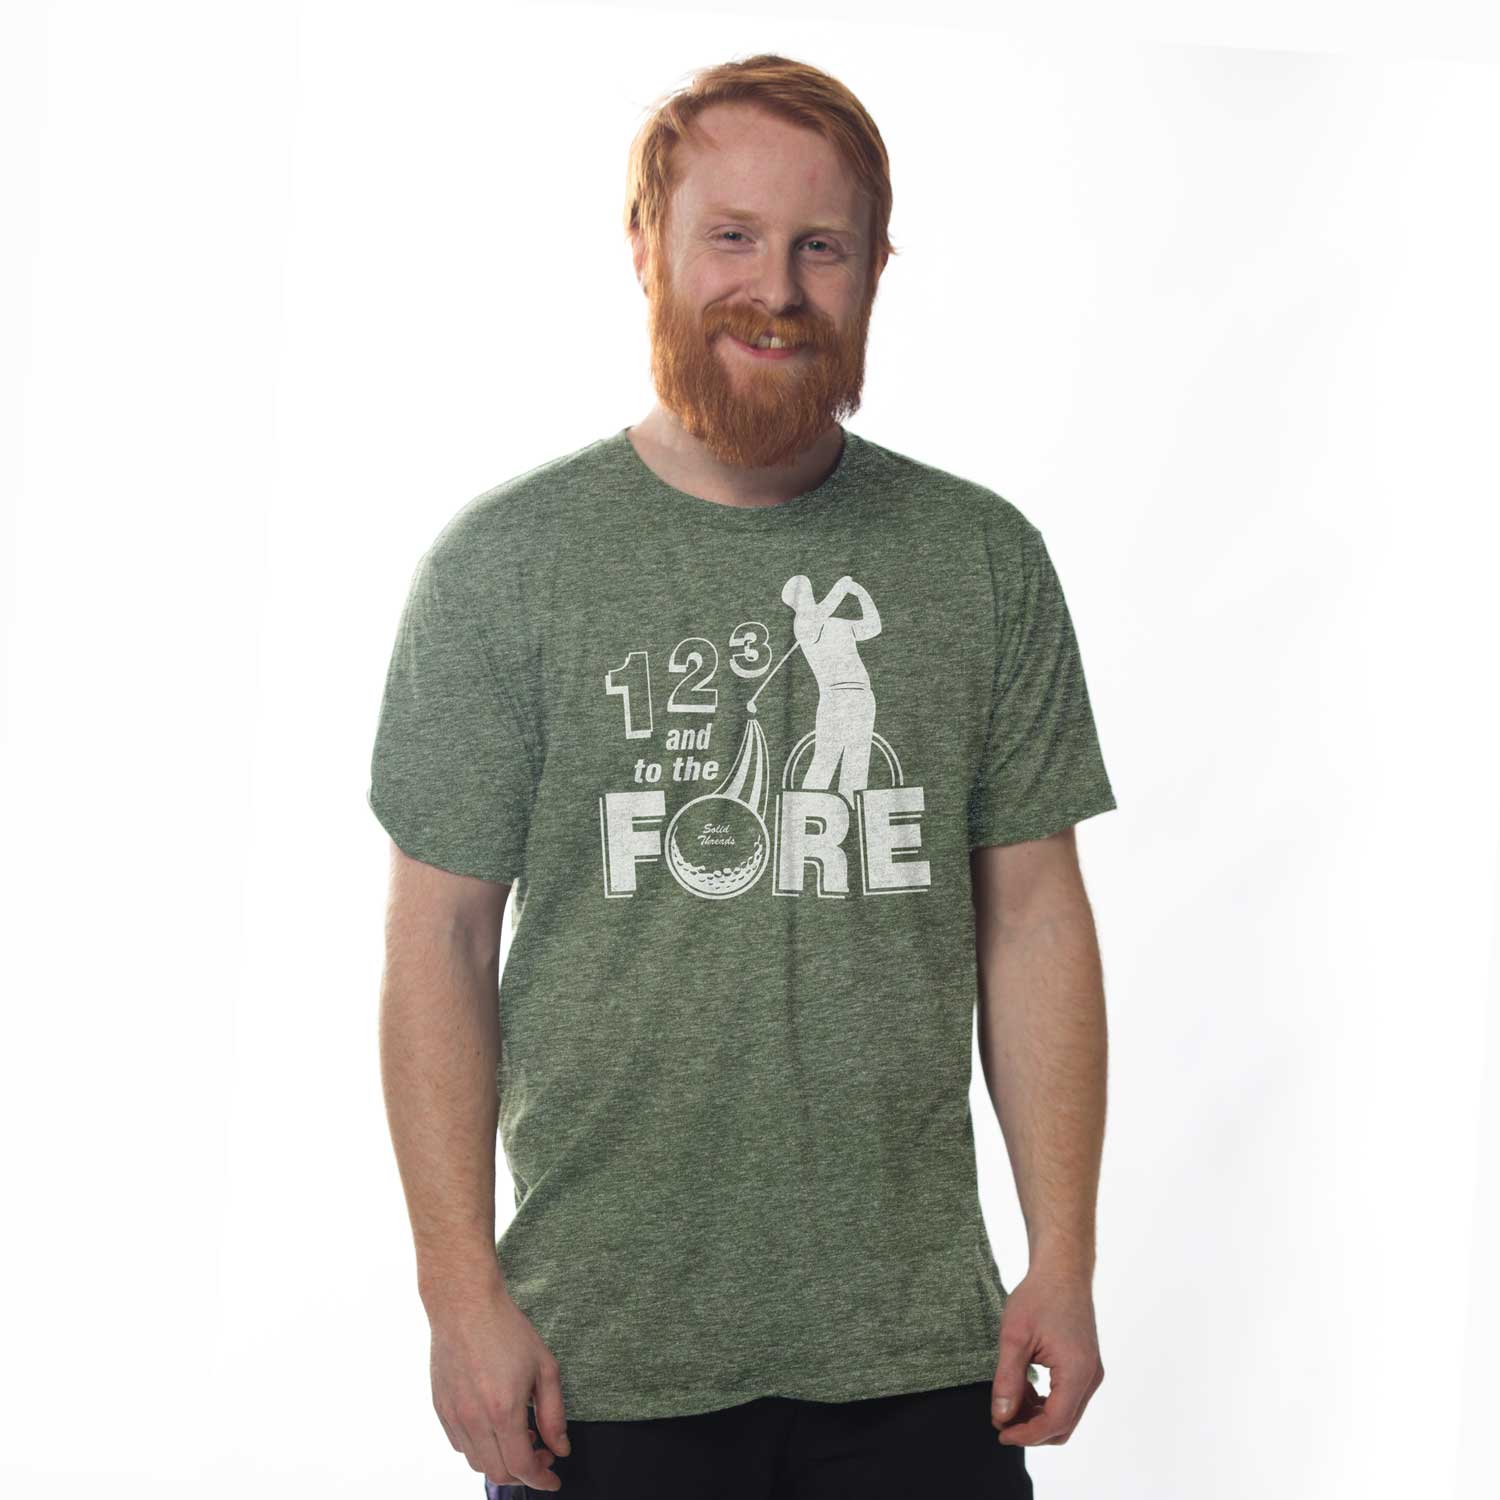 Men’s 1, 2, 3, Fore Vintage Graphic Tee | Funny Golf Course T-shirt on Model | Solid Threads